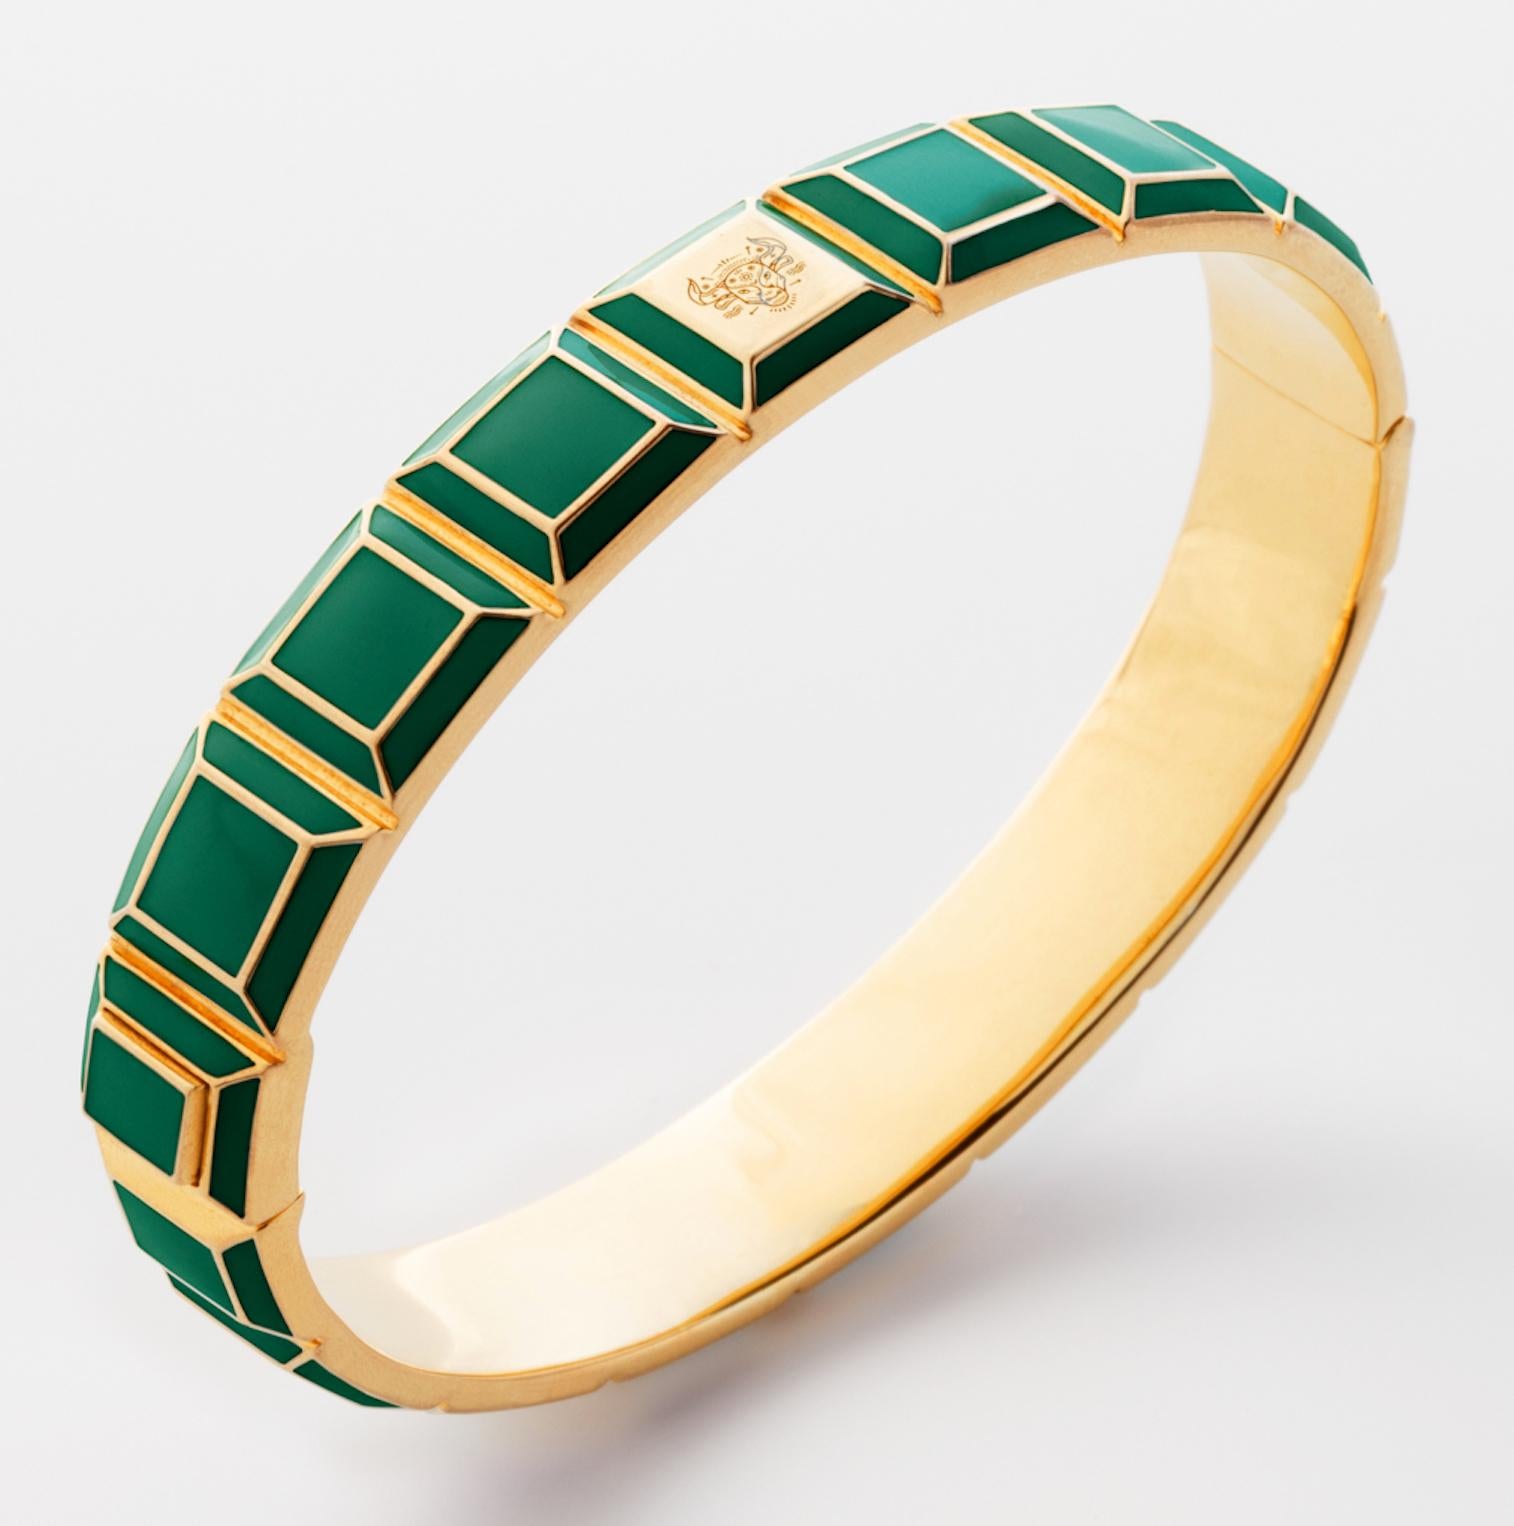 Gold-Plated Enamel Carousel Bracelet features a Yellow Gold Plated Silver bracelet with green enamel and Taurus Zodiac engraving, along with a clasp closure that secures the bracelet onto the wearer's wrist. 
Yellow Gold Plated Silver, Green